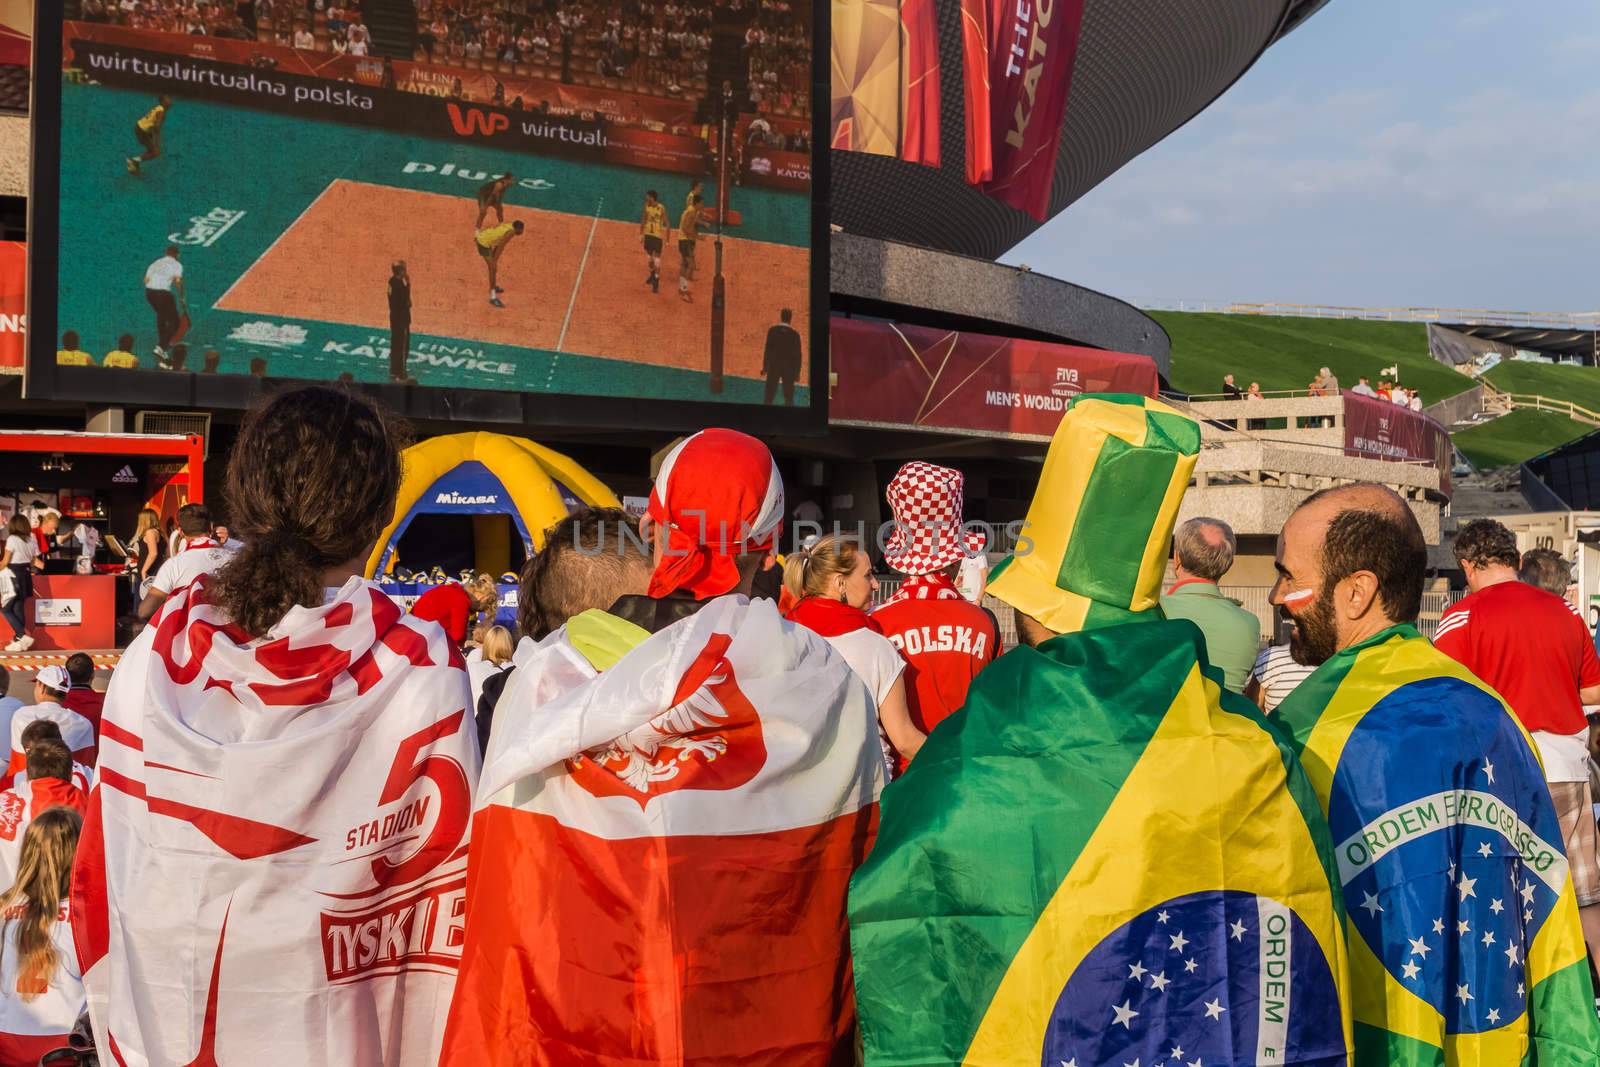 Polish and Brazilian fans watch Brazil vs France match on the screen in the fanzone at Spodek Arena in Katowice during FIVB Volleyball Men's World Championship Poland 2014.